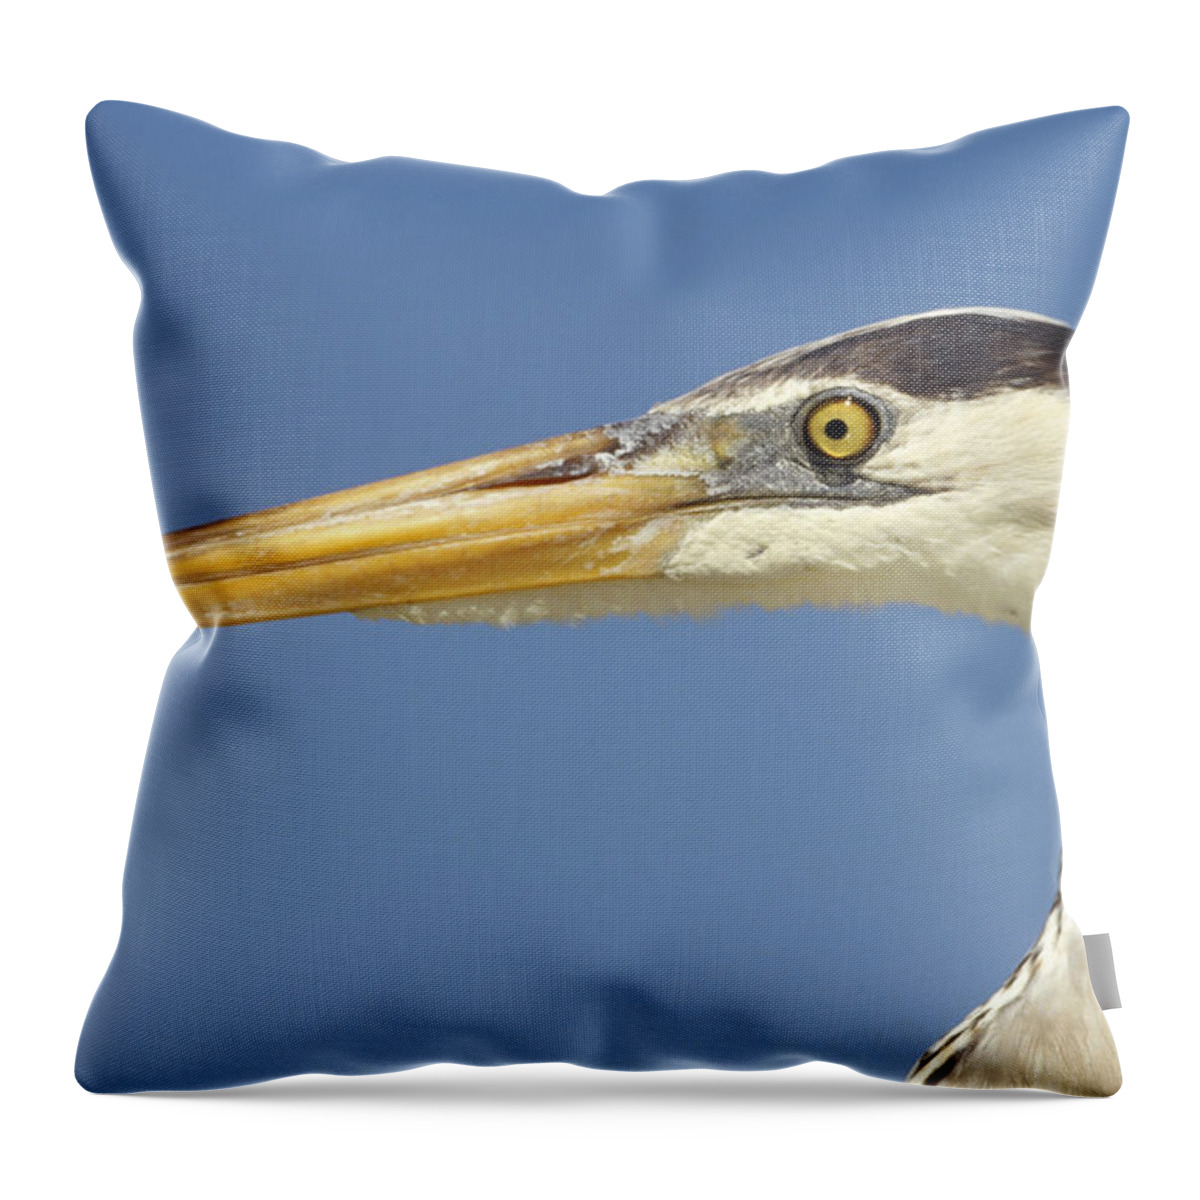 Feb0514 Throw Pillow featuring the photograph Great Blue Heron Portrait Galapagos by Tui De Roy